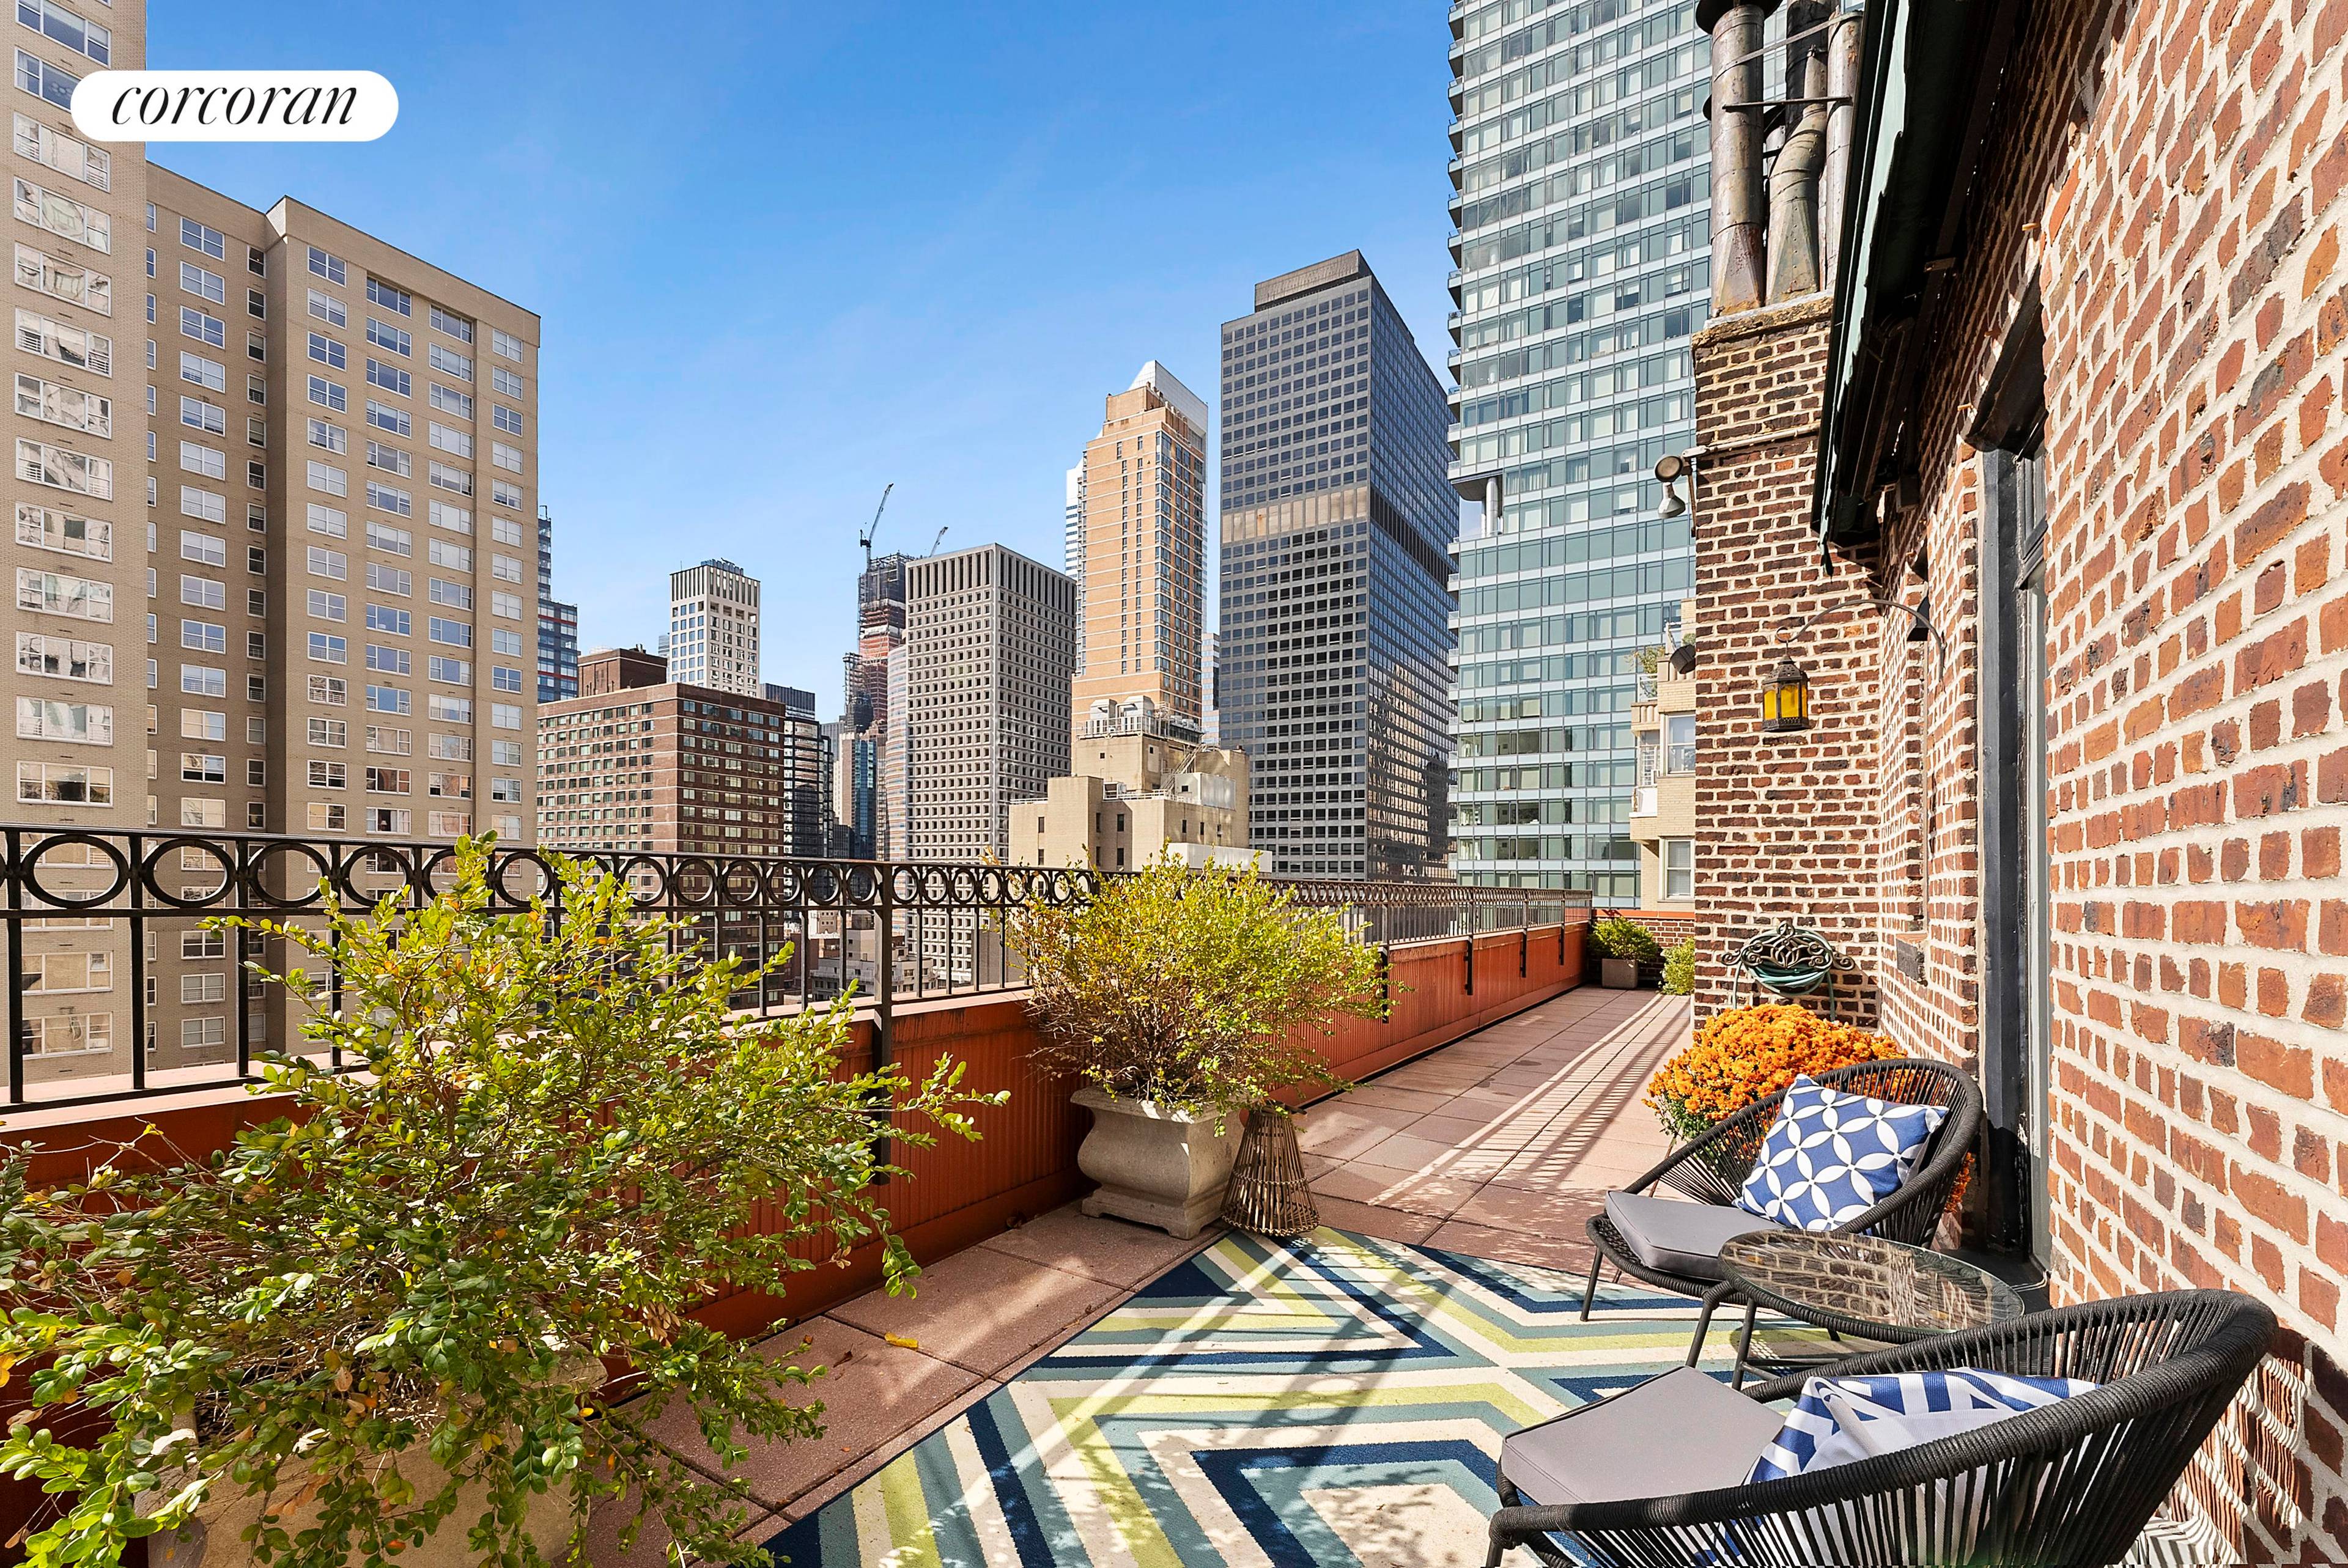 Step right into urban paradise and find yourself in this exquisite penthouse duplex at 320 East 57th Street, in the heart of Sutton Place.